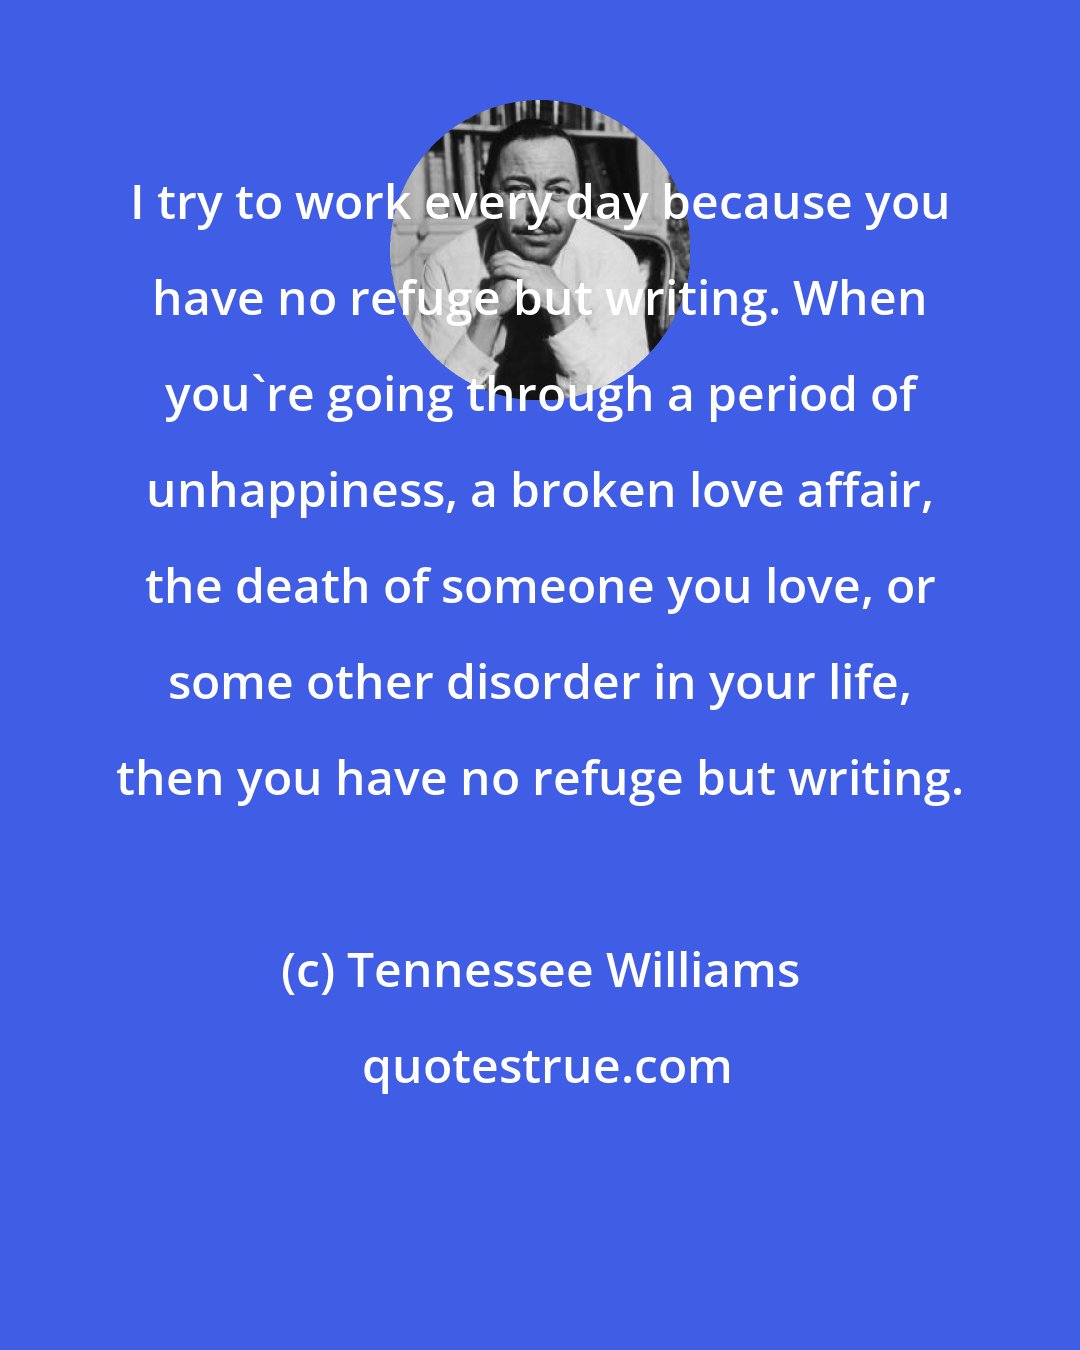 Tennessee Williams: I try to work every day because you have no refuge but writing. When you're going through a period of unhappiness, a broken love affair, the death of someone you love, or some other disorder in your life, then you have no refuge but writing.